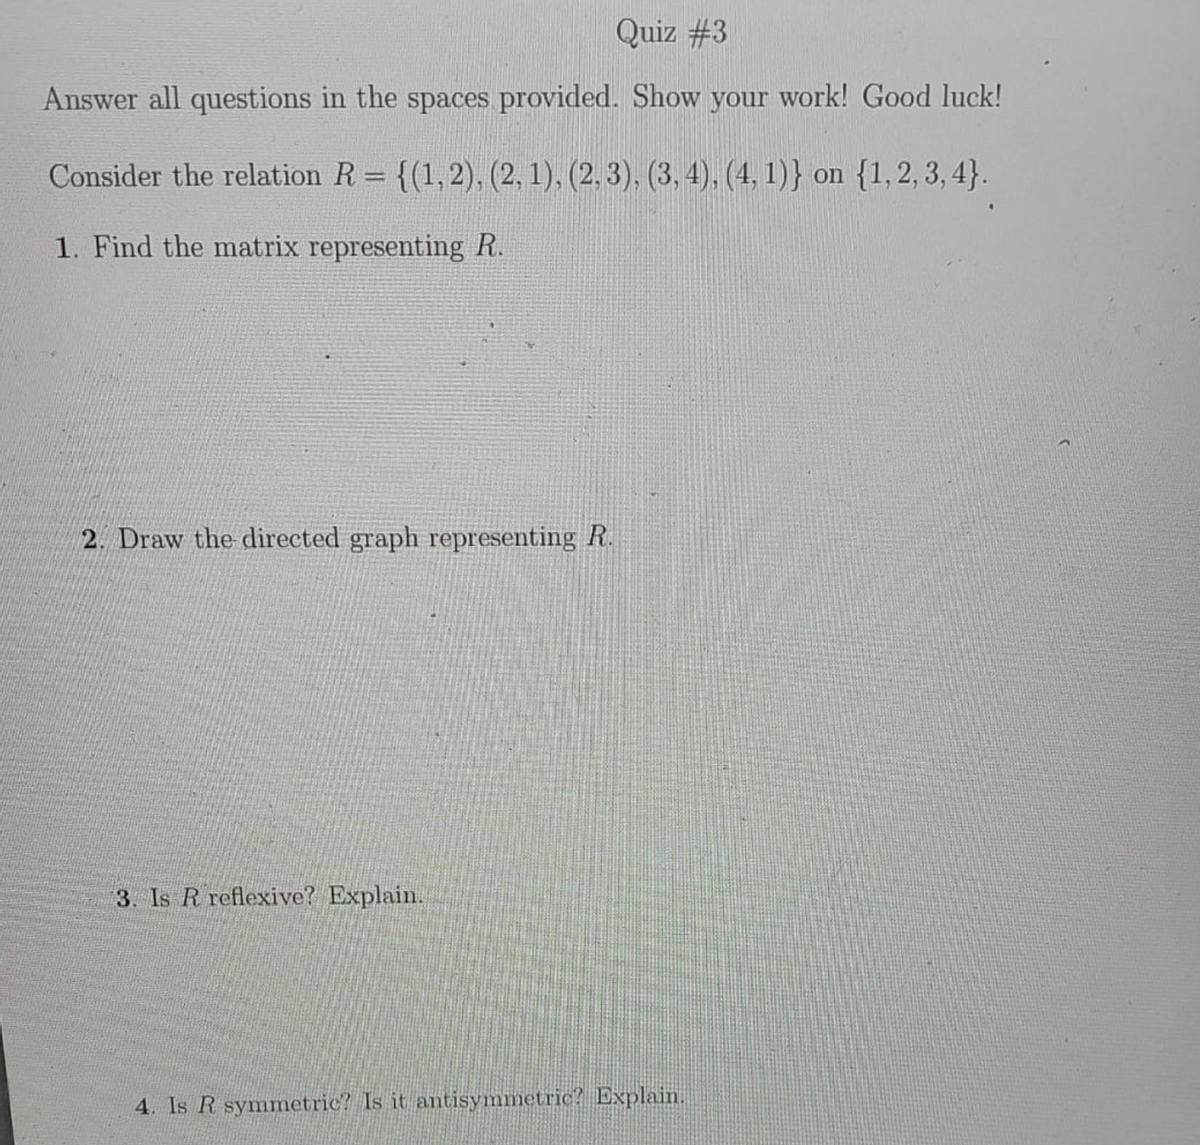 Quiz #3
Answer all questions in the spaces provided. Show your work! Good luck!
Consider the relation R = {(1,2), (2, 1), (2, 3), (3, 4), (4, 1)} on {1,2, 3, 4}.
%3D
1. Find the matrix representing R.
2. Draw the directed graph representing R.
3. Is R reflexive? Explain.
4. Is R symmetric? Is it antisymmetric? Explain.
